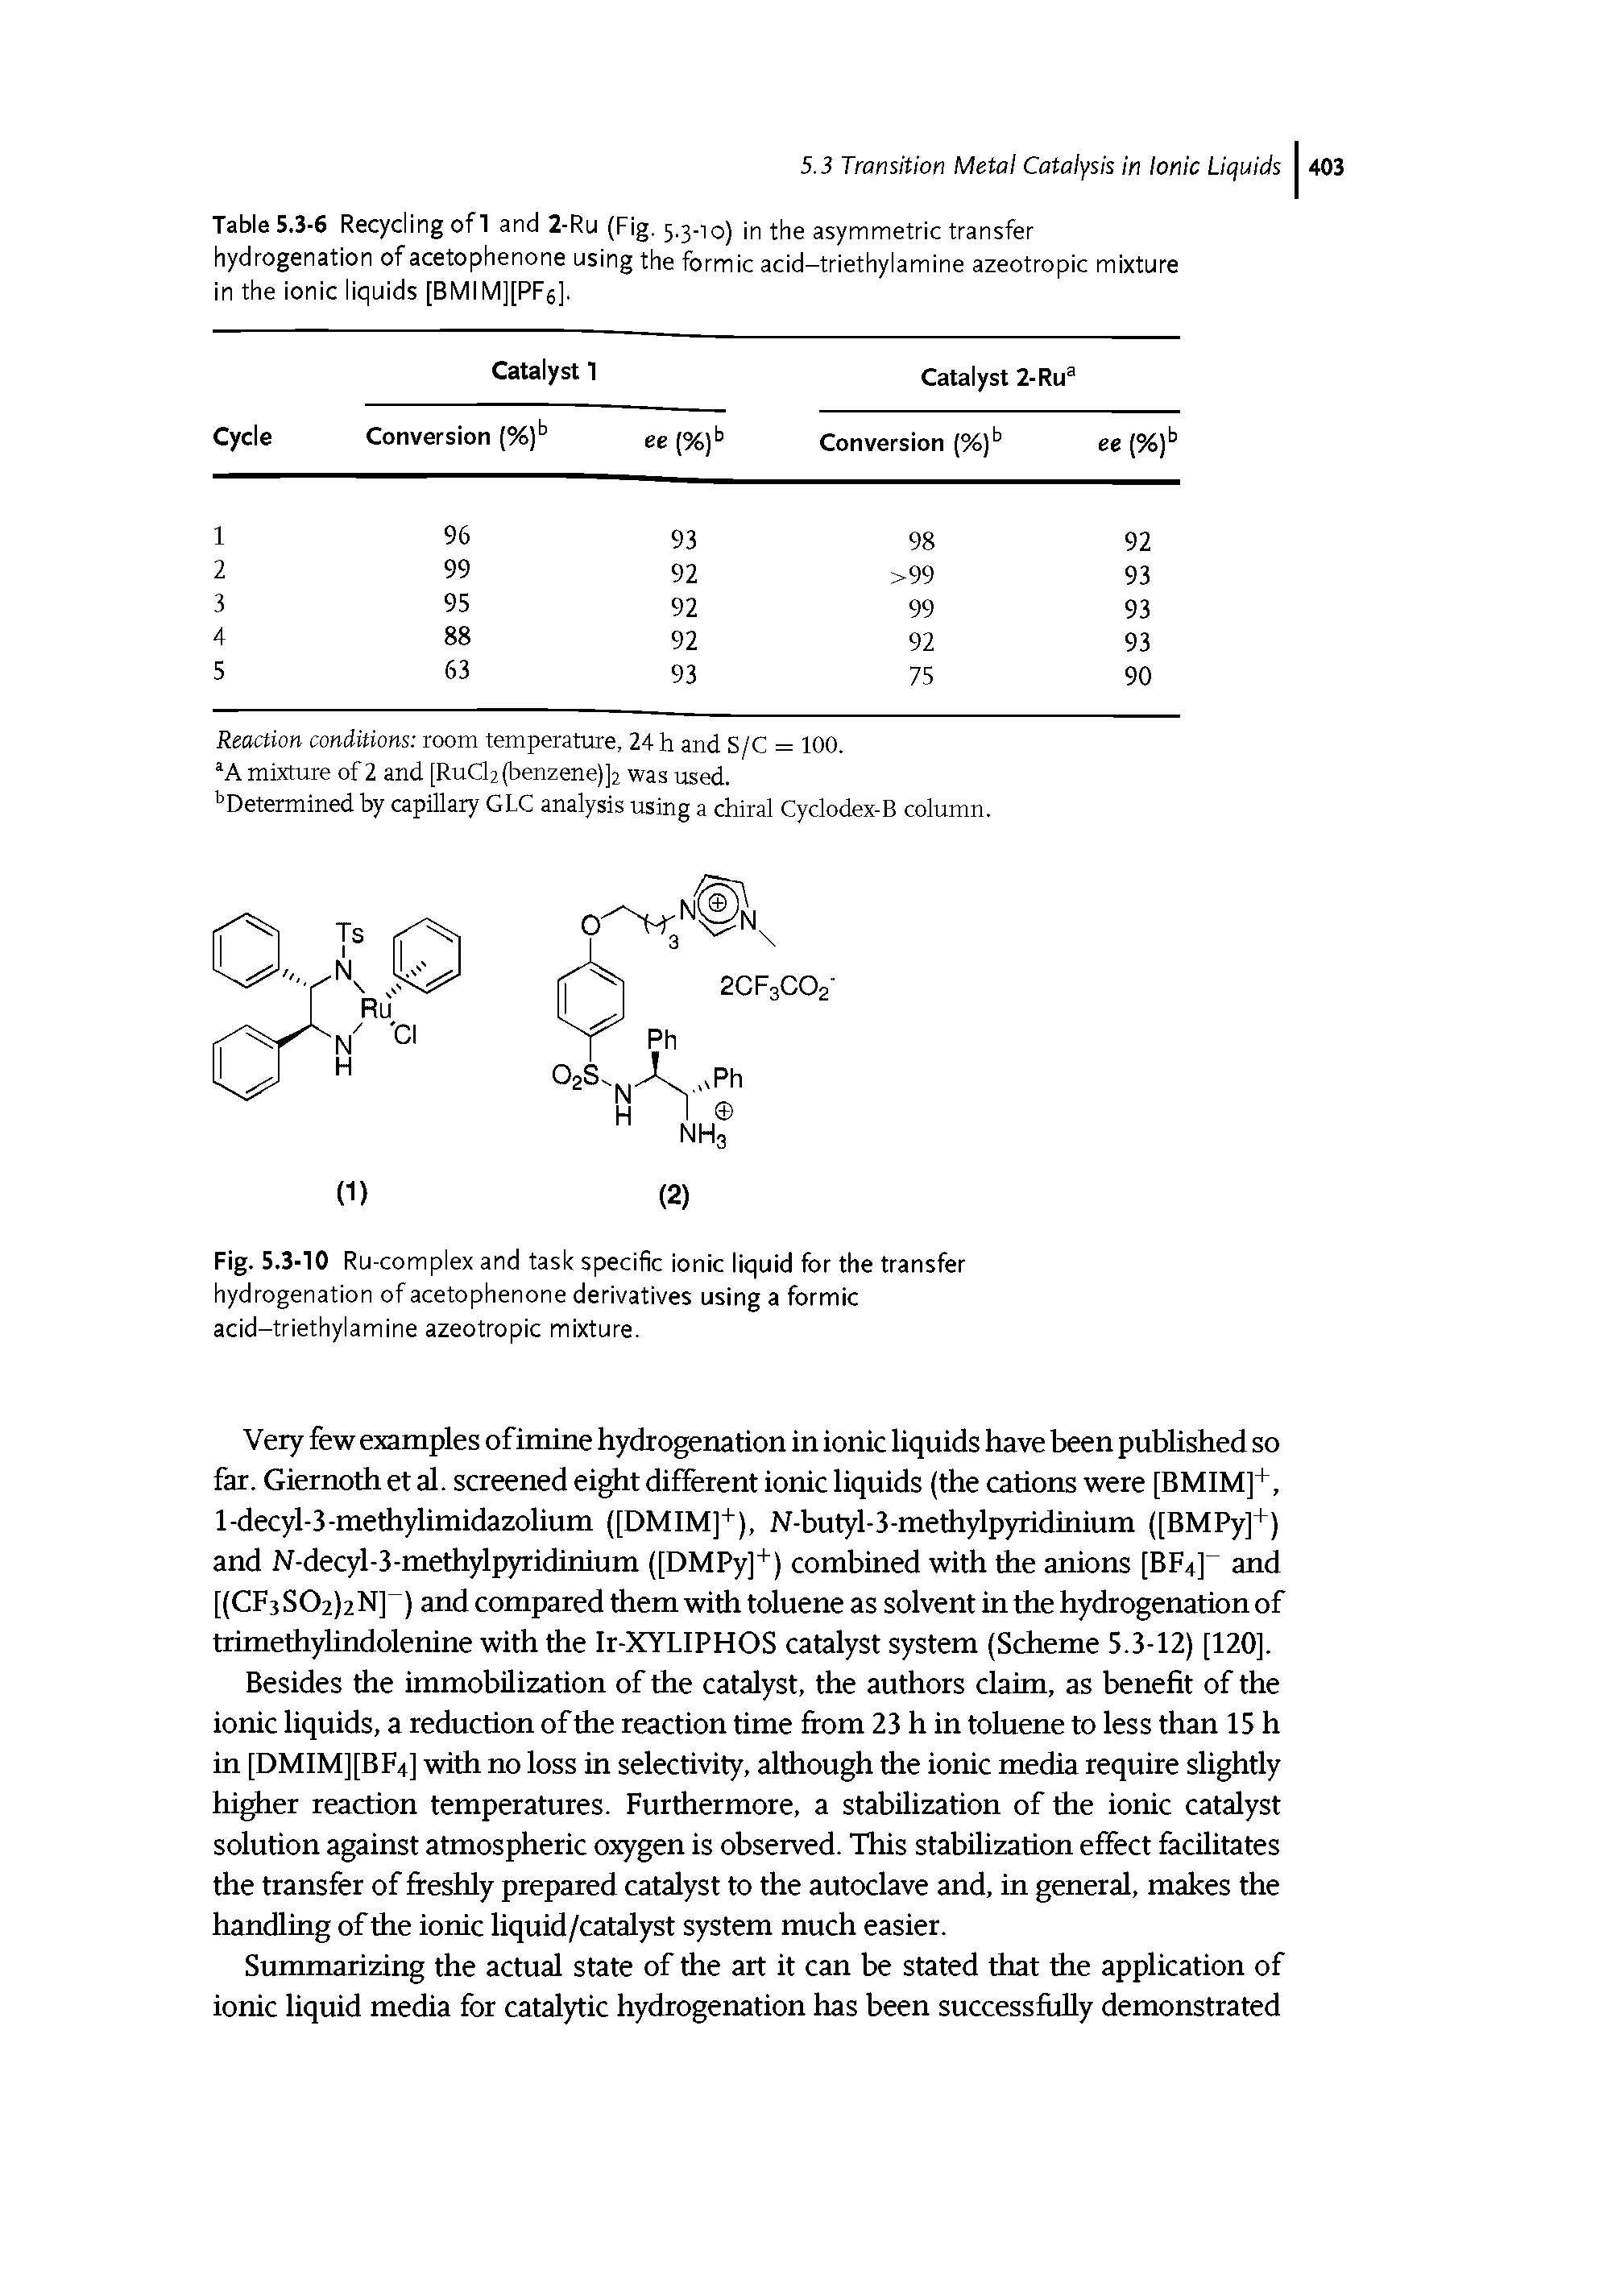 Table 5.3-6 Recycling of 1 and 2-Ru (Fig. 5.3-10) in the asymmetric transfer hydrogenation of acetophenone using the formic acid-triethylamine azeotropic mixture in the ionic liquids [BMIM][PF6].